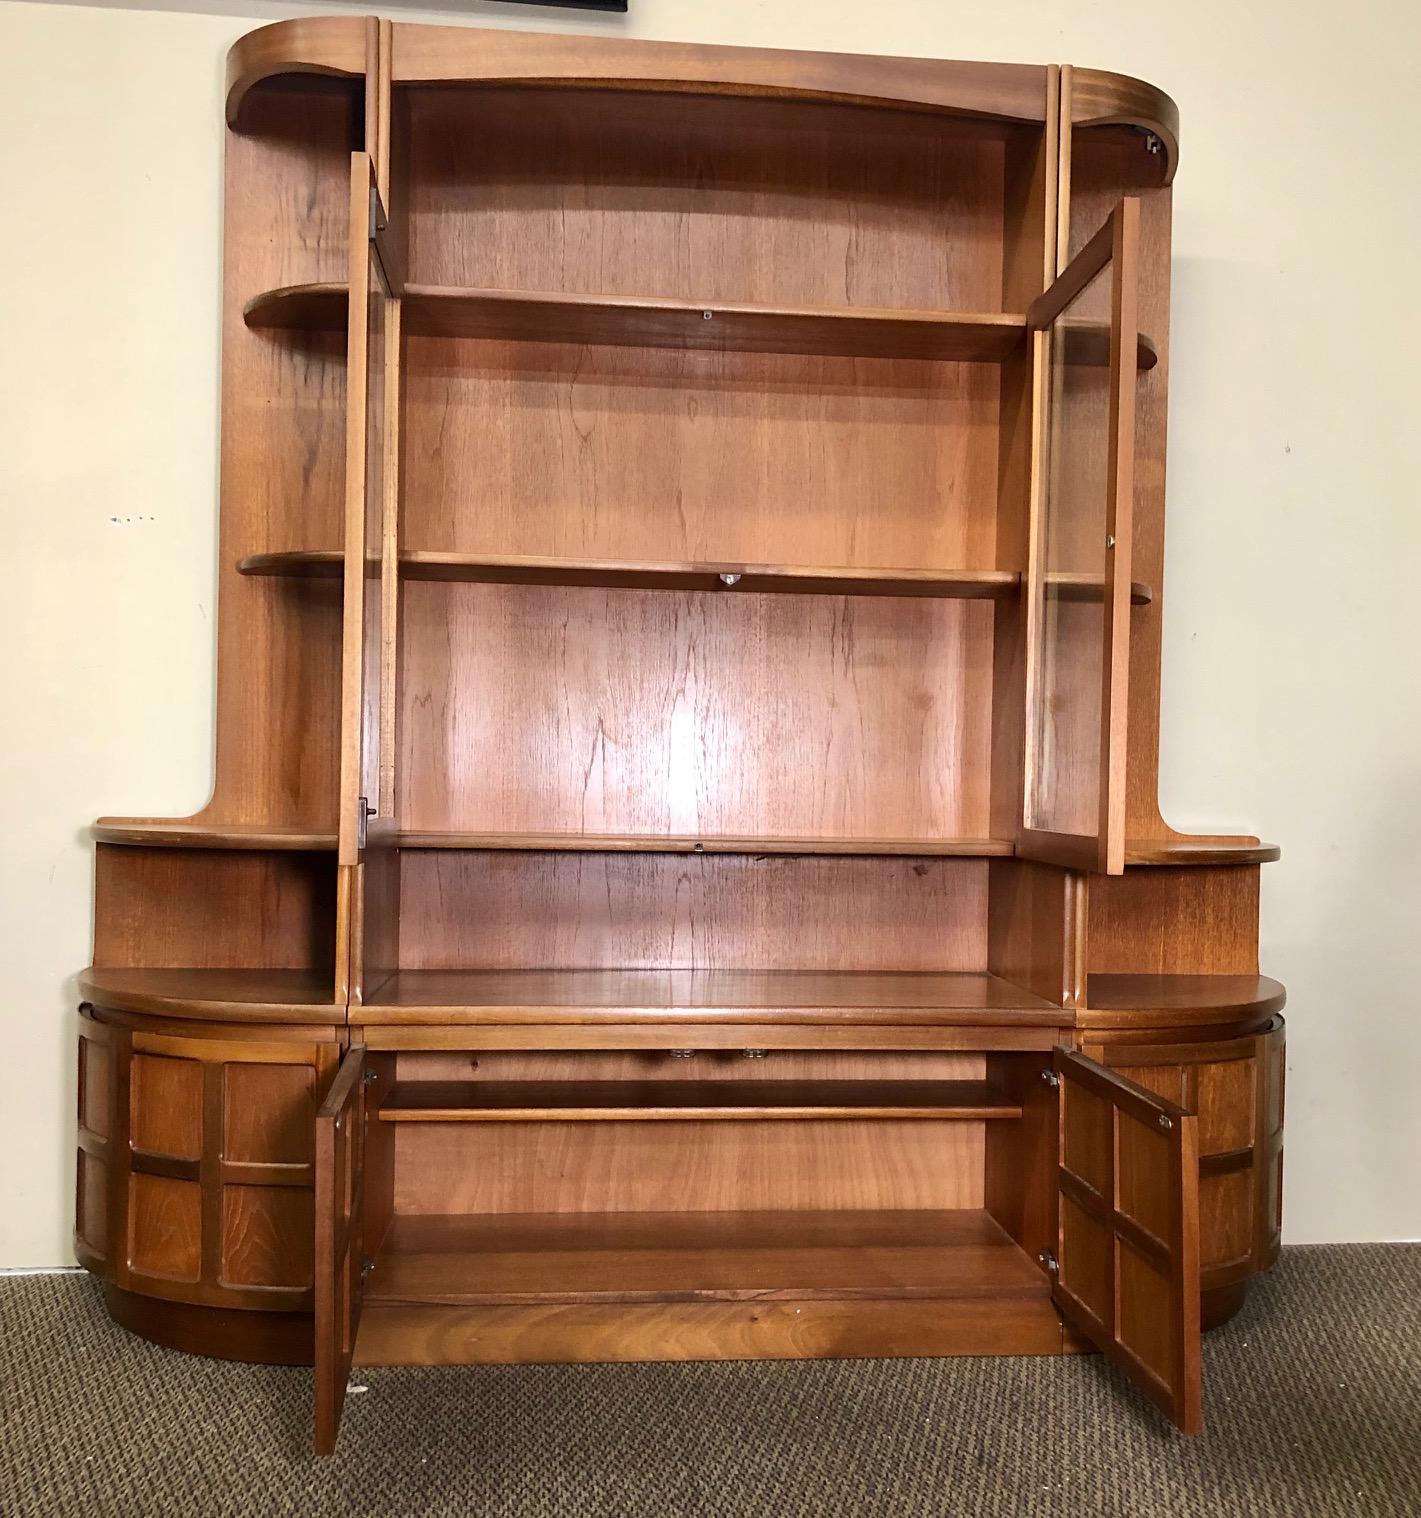 Fantastic teak wall unit made by Nathan Furniture. Made in England.

Features 2 smaller corner units and a main unit. The corner shelves are adjustable. Remove two small pins and slide shelf out to adjust. See last two photos. Original labels are